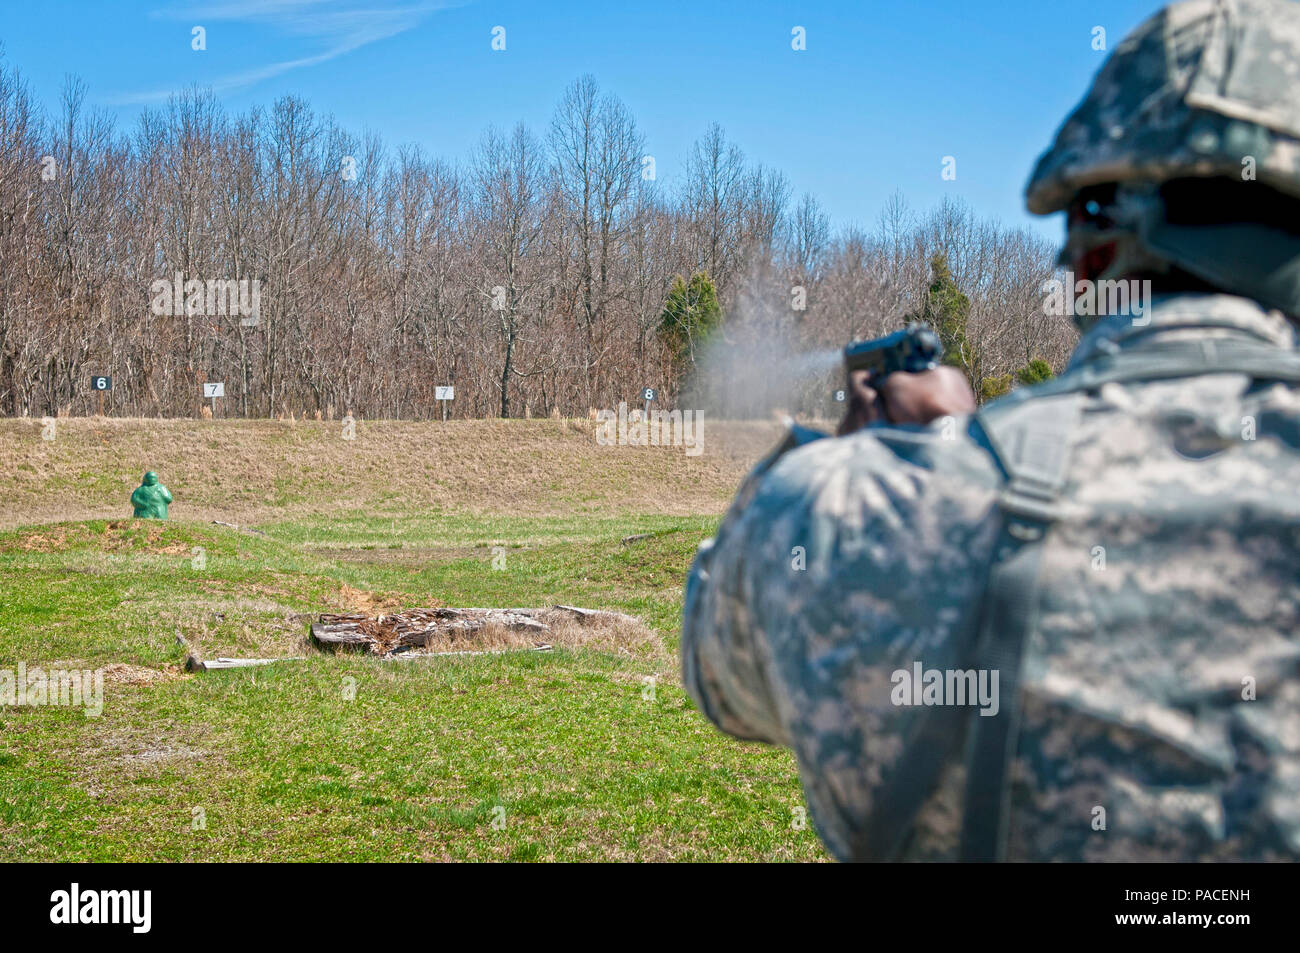 Sgt. Edward Taylor, with the 444th Human Resources Company, shoots a pop-up target with a Beretta M9 pistol during the 316th Sustainment Command (Expeditionary) Best Warrior Competition at Fort Knox, Ky., March 16, 2016. (U.S. Army photo by Staff Sgt. Dalton Smith/Released) Stock Photo